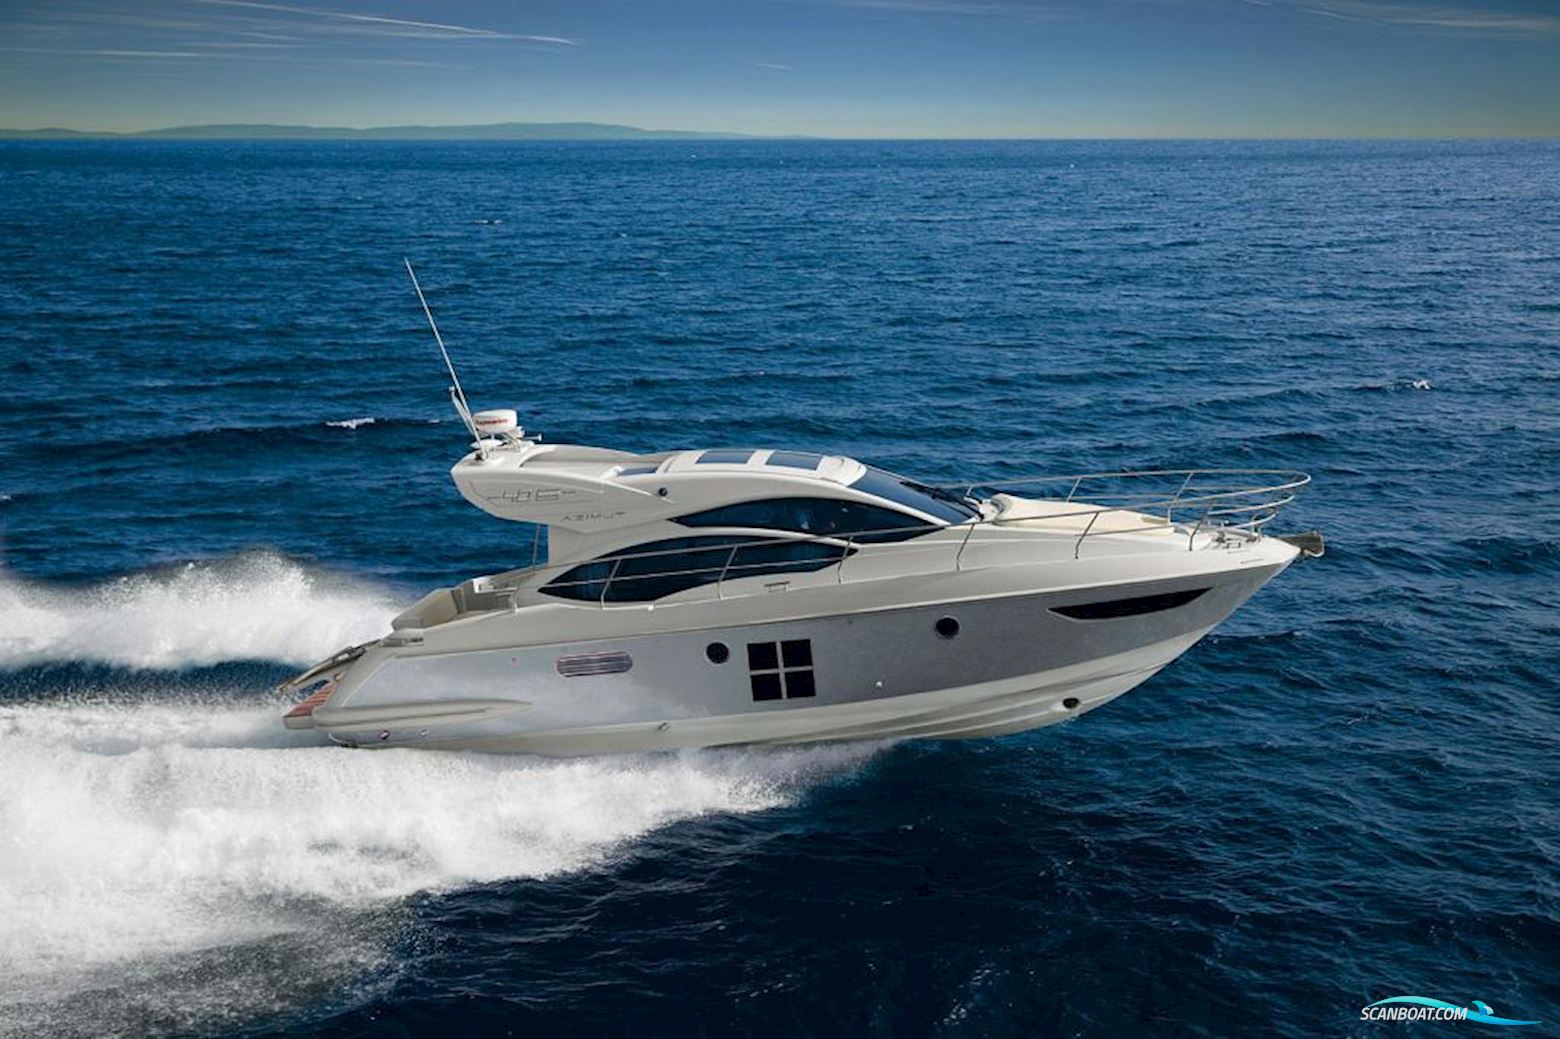 Azimut 40S Motor boat 2013, with Cummins Qsb 5.9 engine, Italy